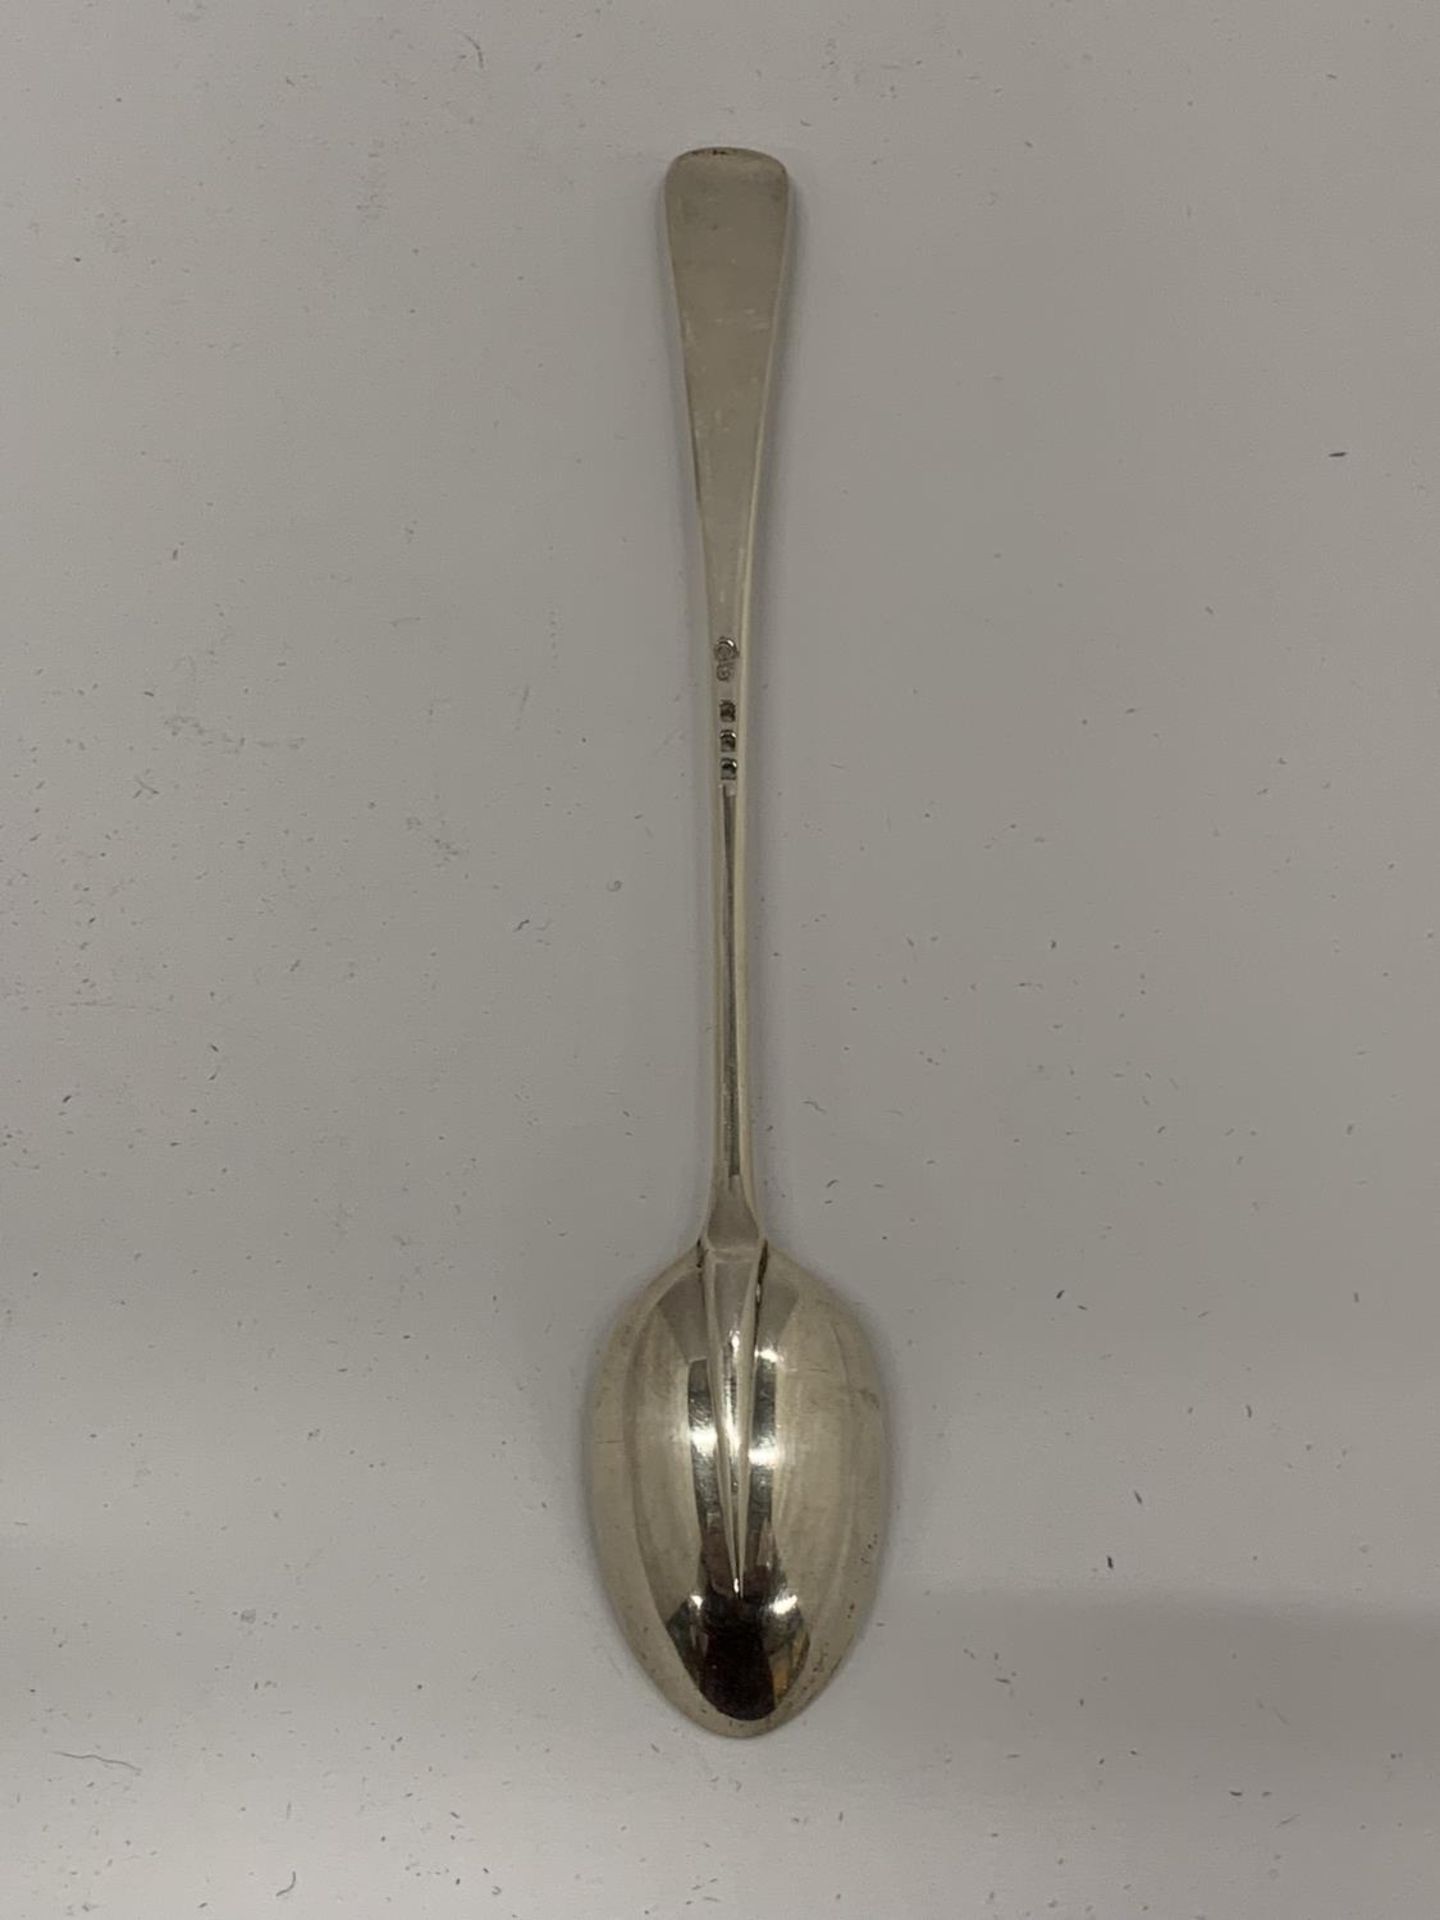 A HALLMARKED SILVER LONG HANDLED SPOON, LENGTH 19CM, WEIGHT 45G - Image 4 of 6